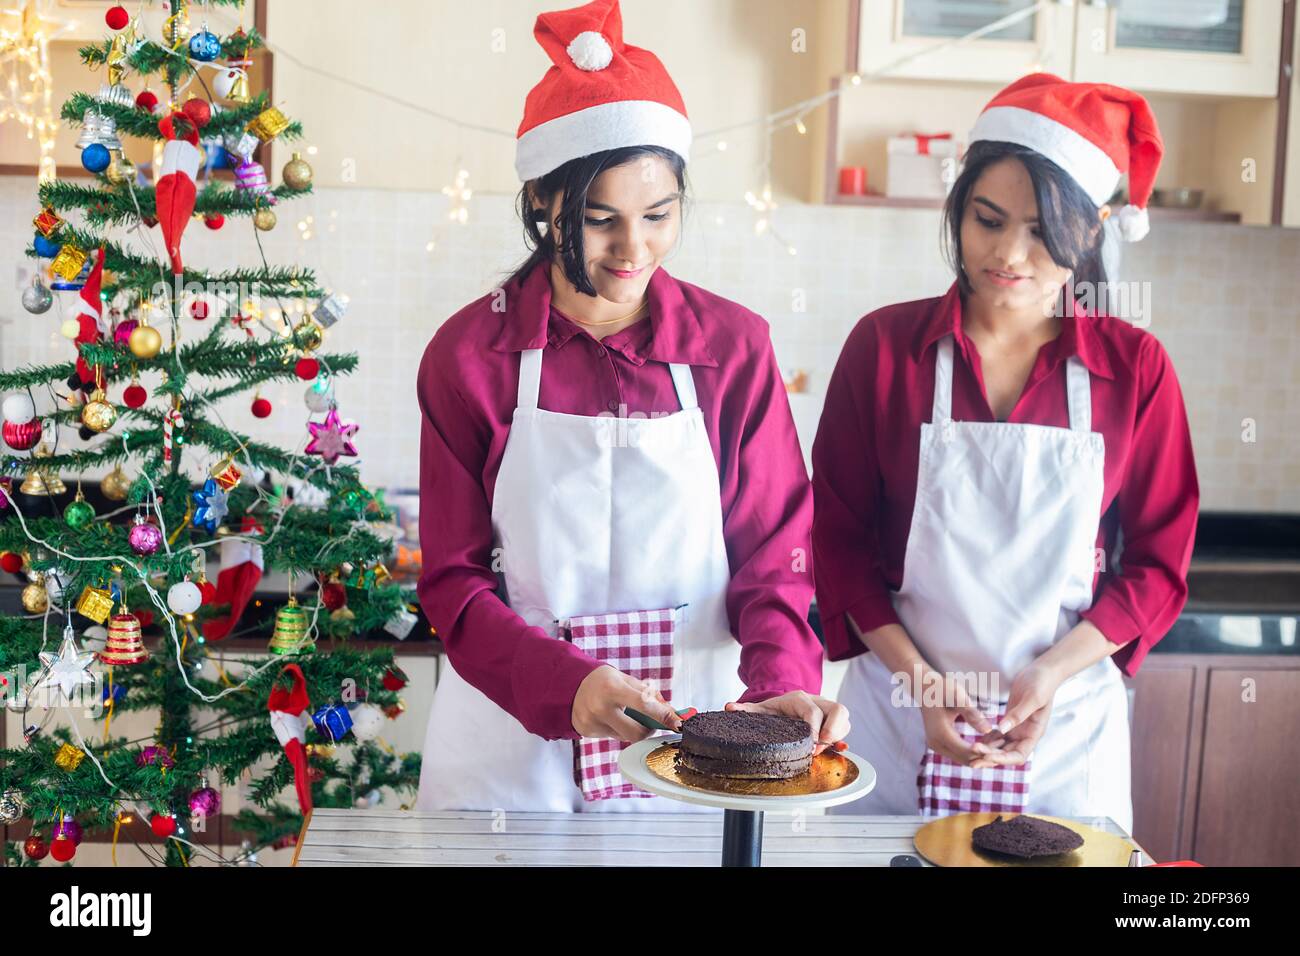 https://c8.alamy.com/comp/2DFP369/two-young-girls-wearing-chef-apron-and-santa-hat-preparing-christmas-cake-bread-at-home-with-decorated-tree-in-the-background-holiday-and-party-seaso-2DFP369.jpg